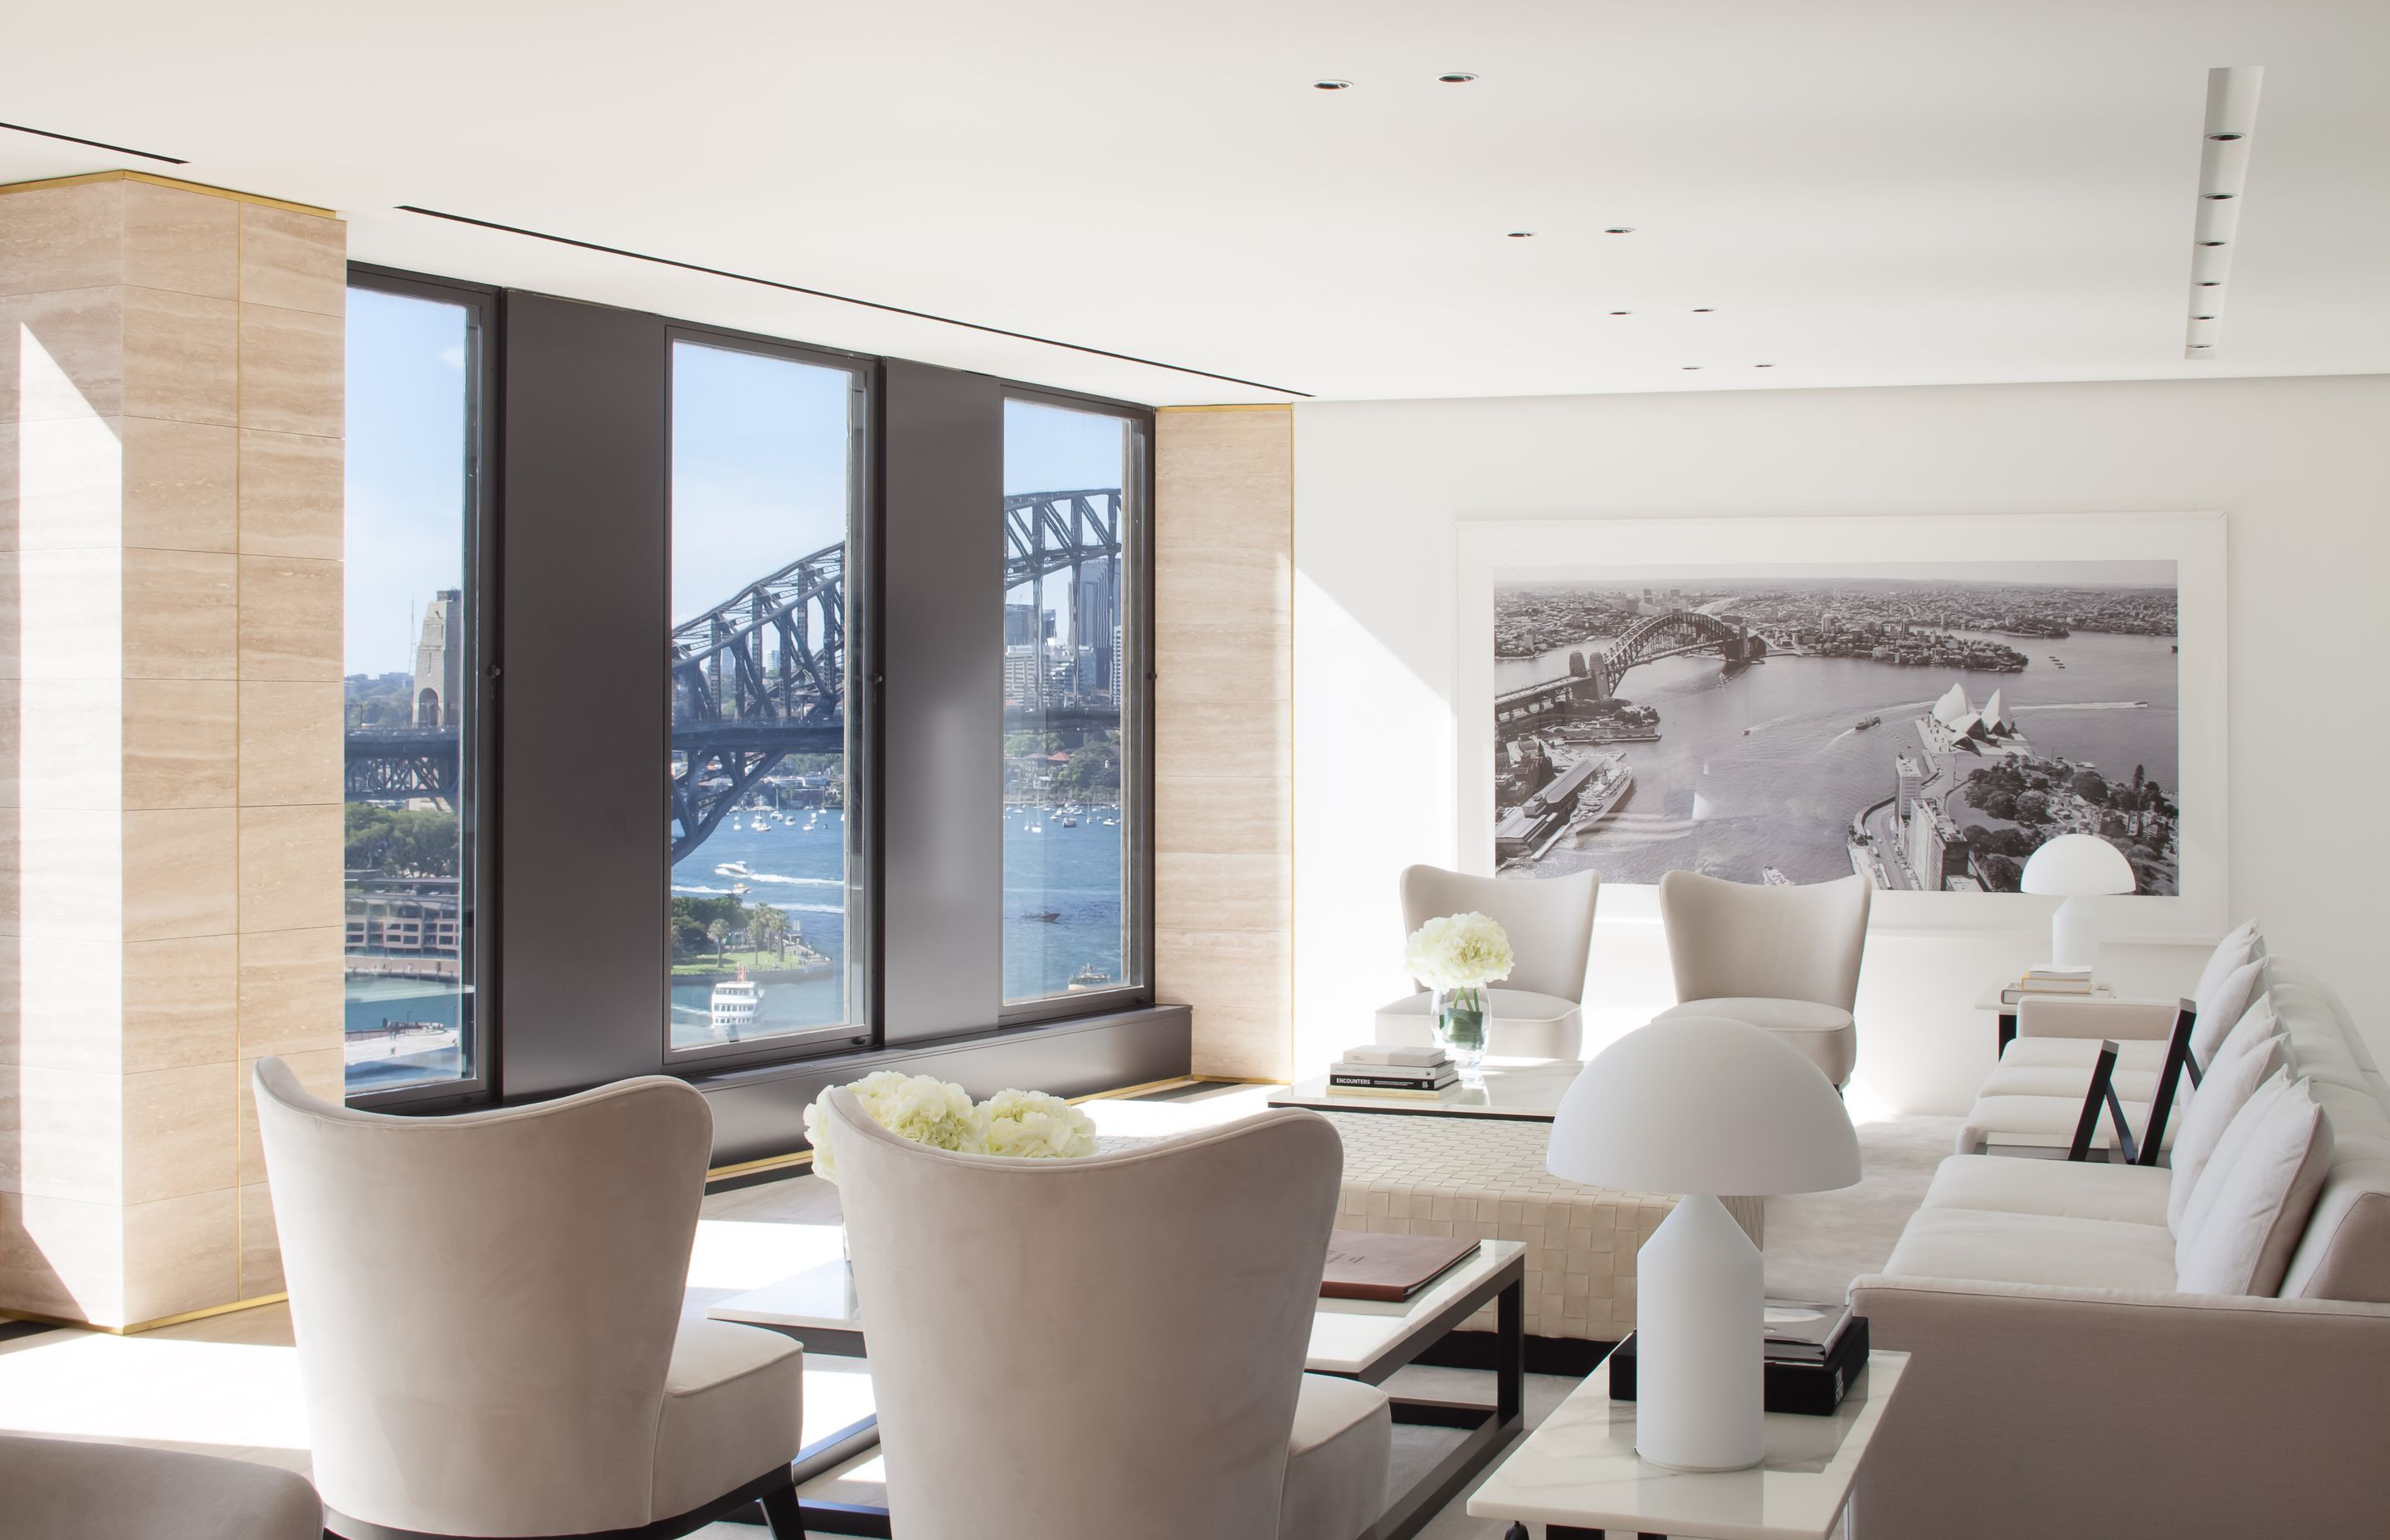 Opera Residences, Sydney. Lead interior design by Tracey Wiles for Woods Bagot, with architecture by Tzannes.